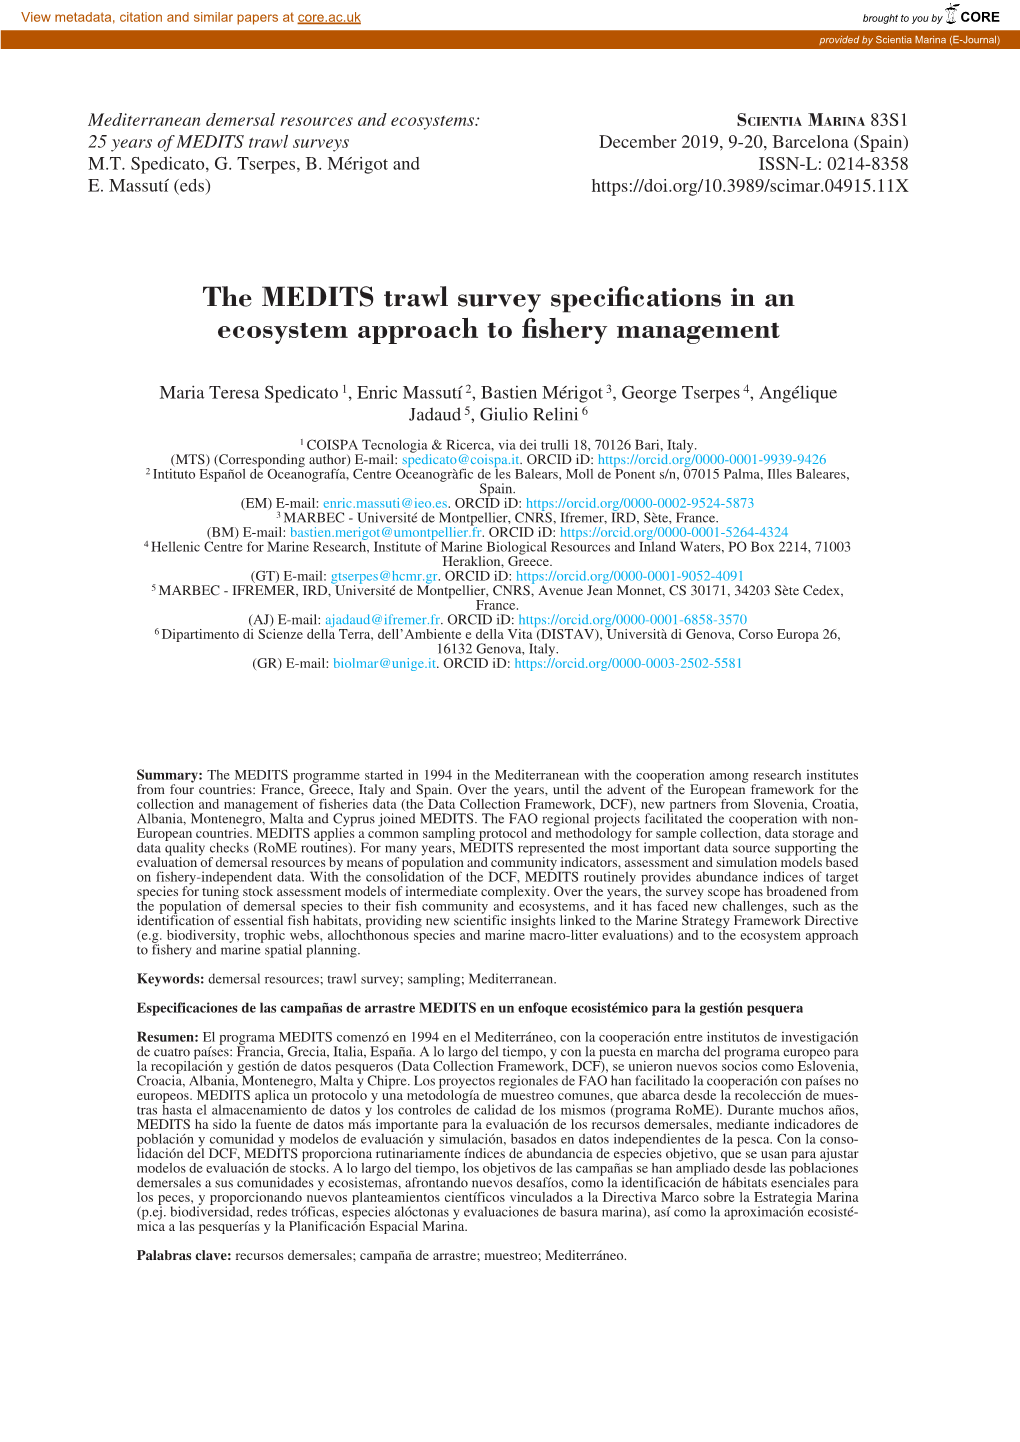 The MEDITS Trawl Survey Specifications in an Ecosystem Approach to Fishery Management